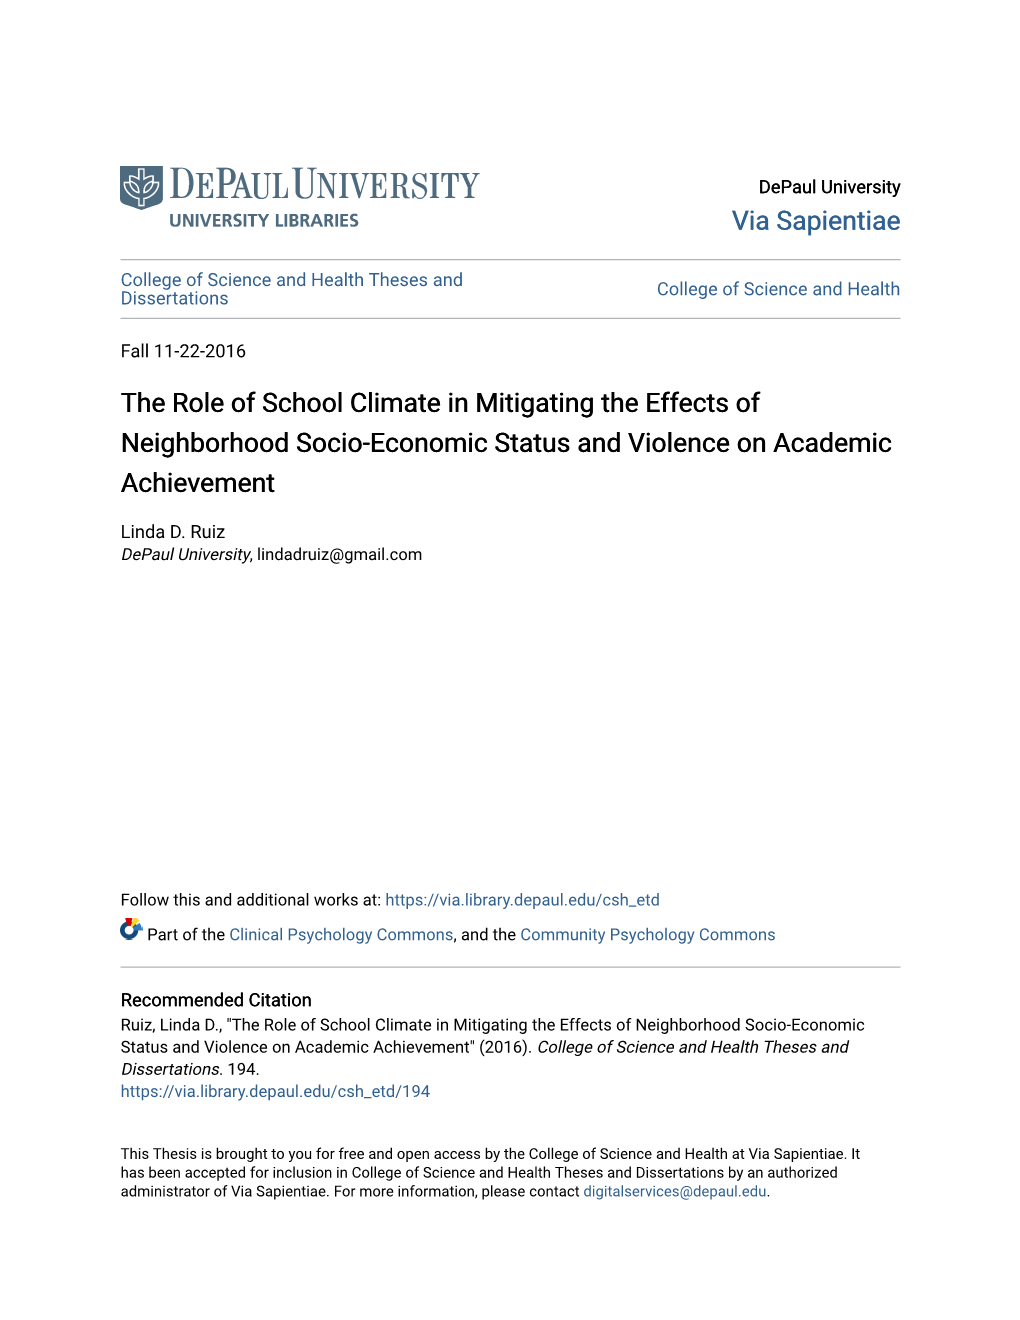 The Role of School Climate in Mitigating the Effects of Neighborhood Socio-Economic Status and Violence on Academic Achievement